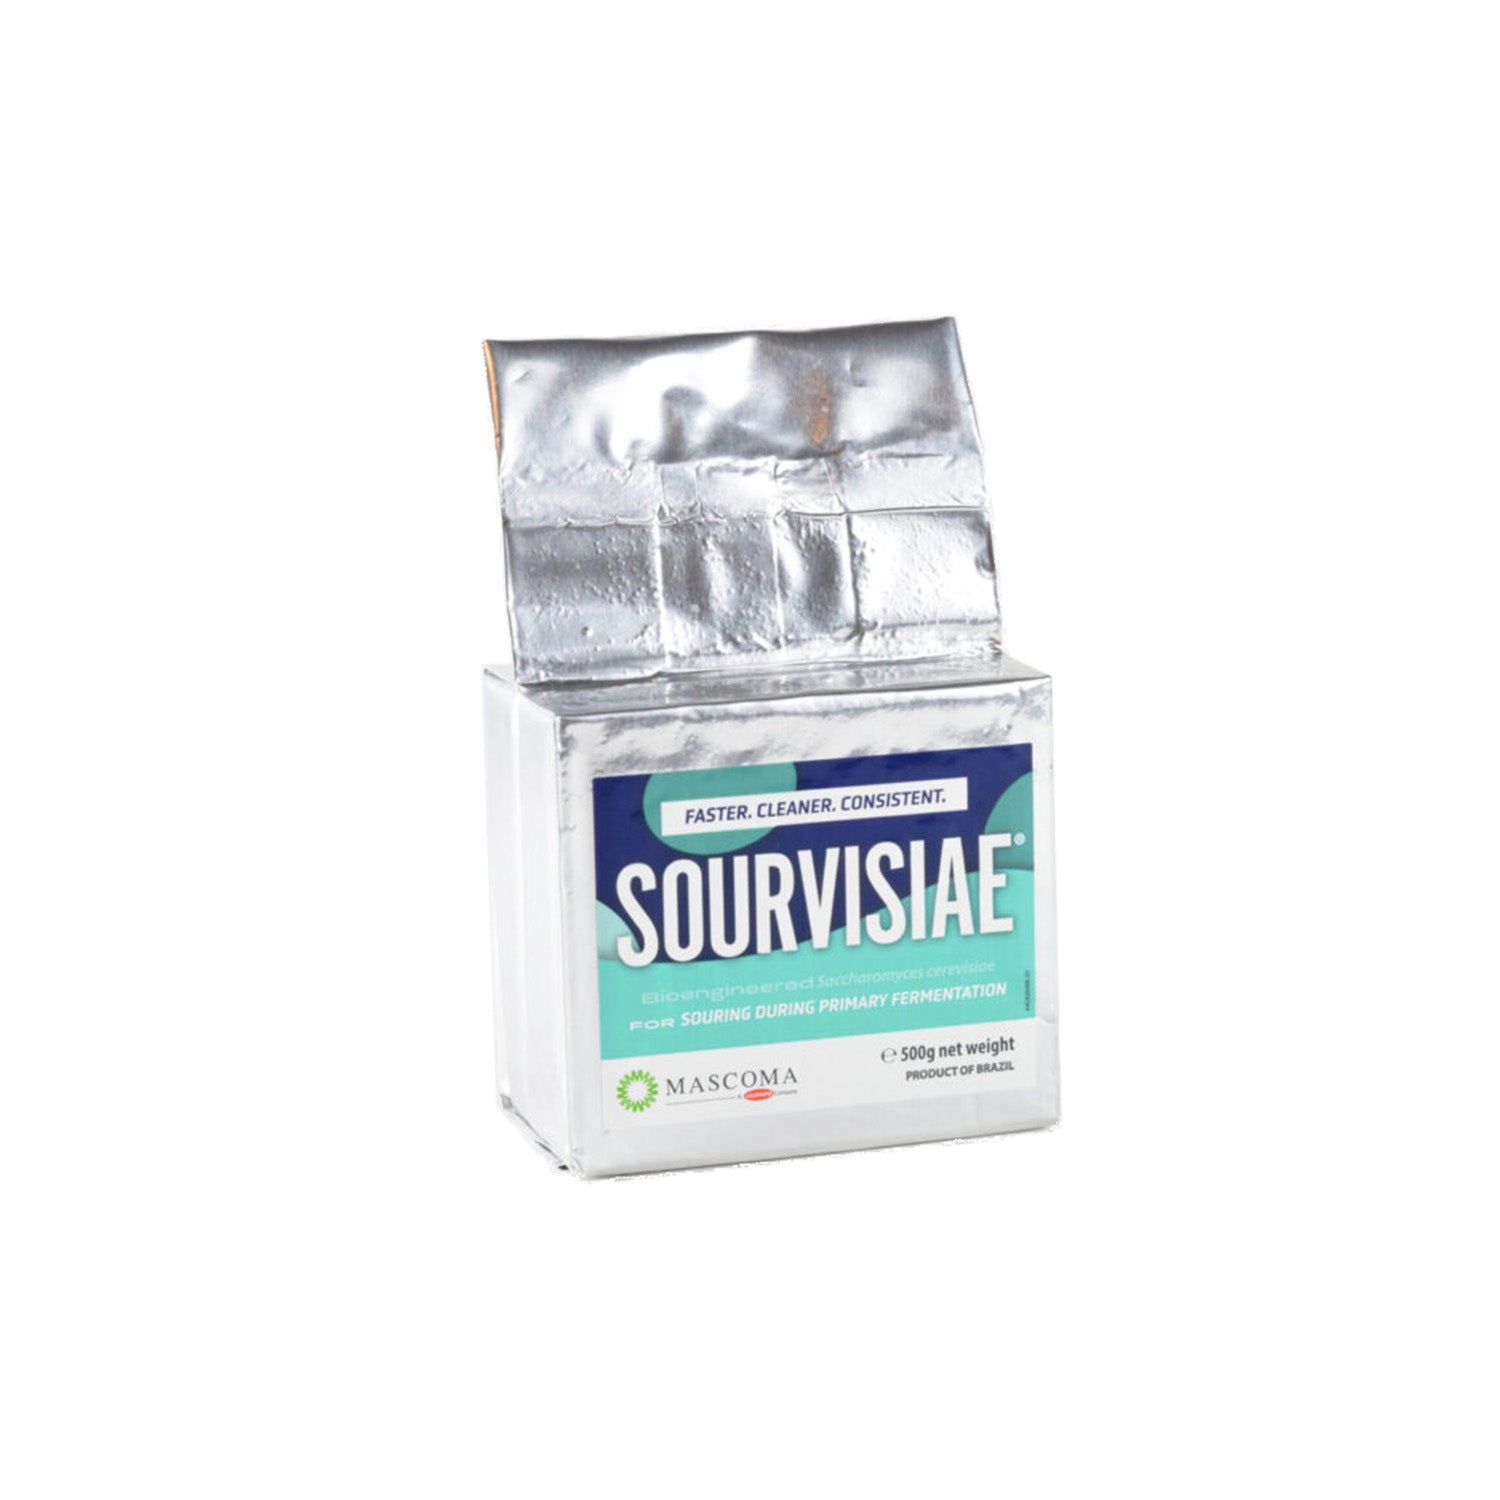 Sourvisiae Lactic-Producing Yeast (500g)